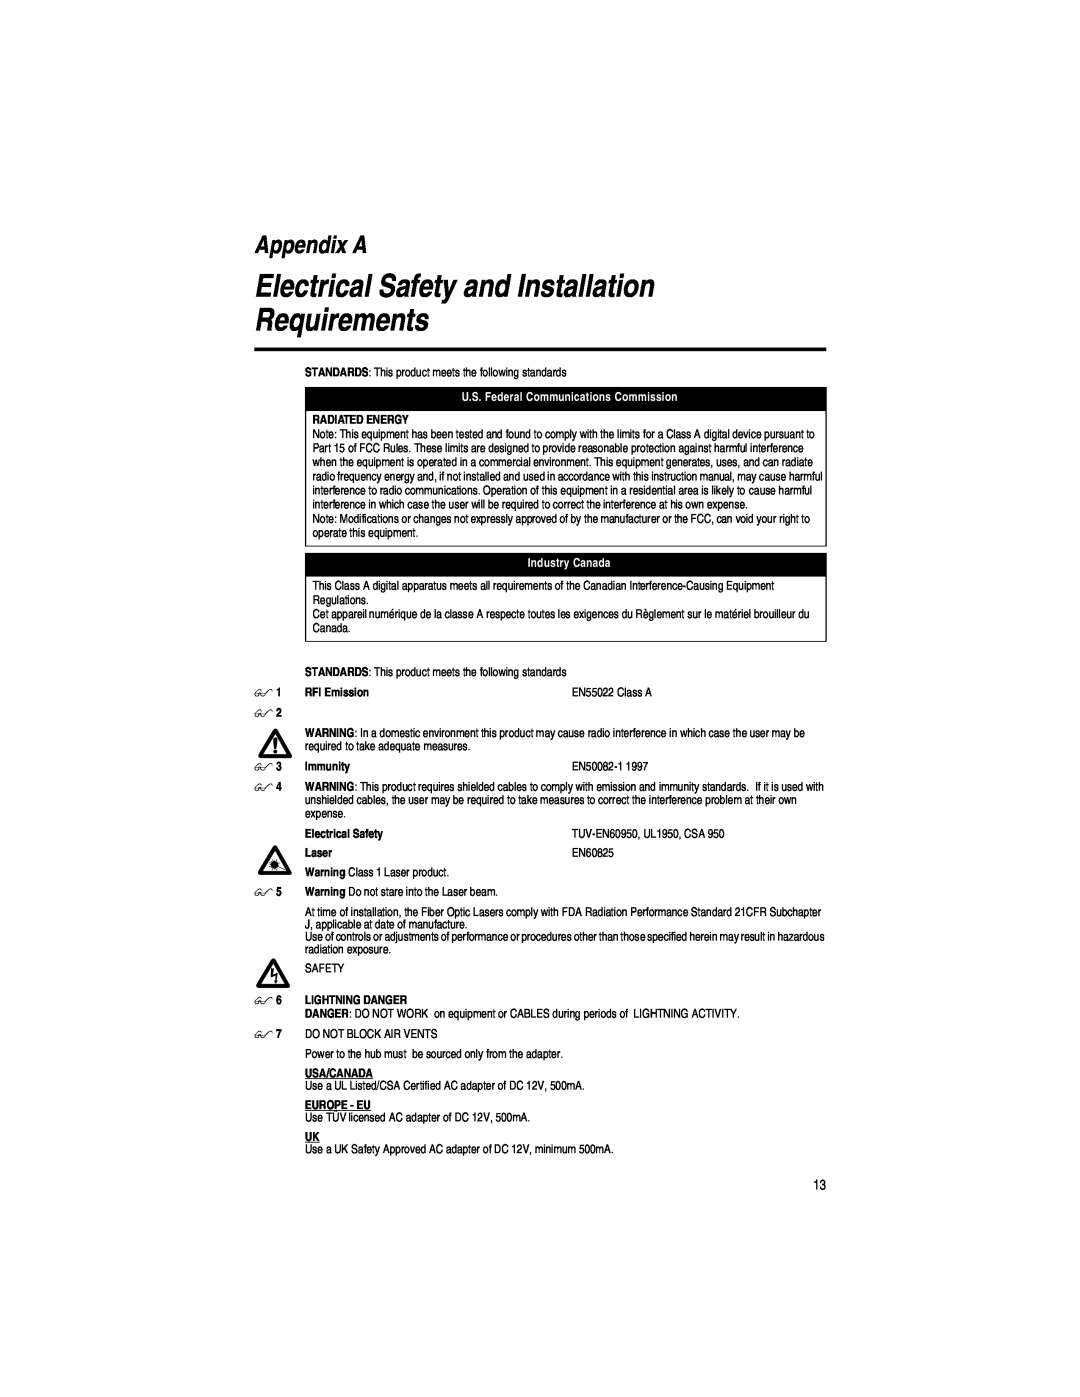 Allied Telesis AT-MC101XL, AT-MC102XL manual Electrical Safety and Installation Requirements, Appendix A, Industry Canada 